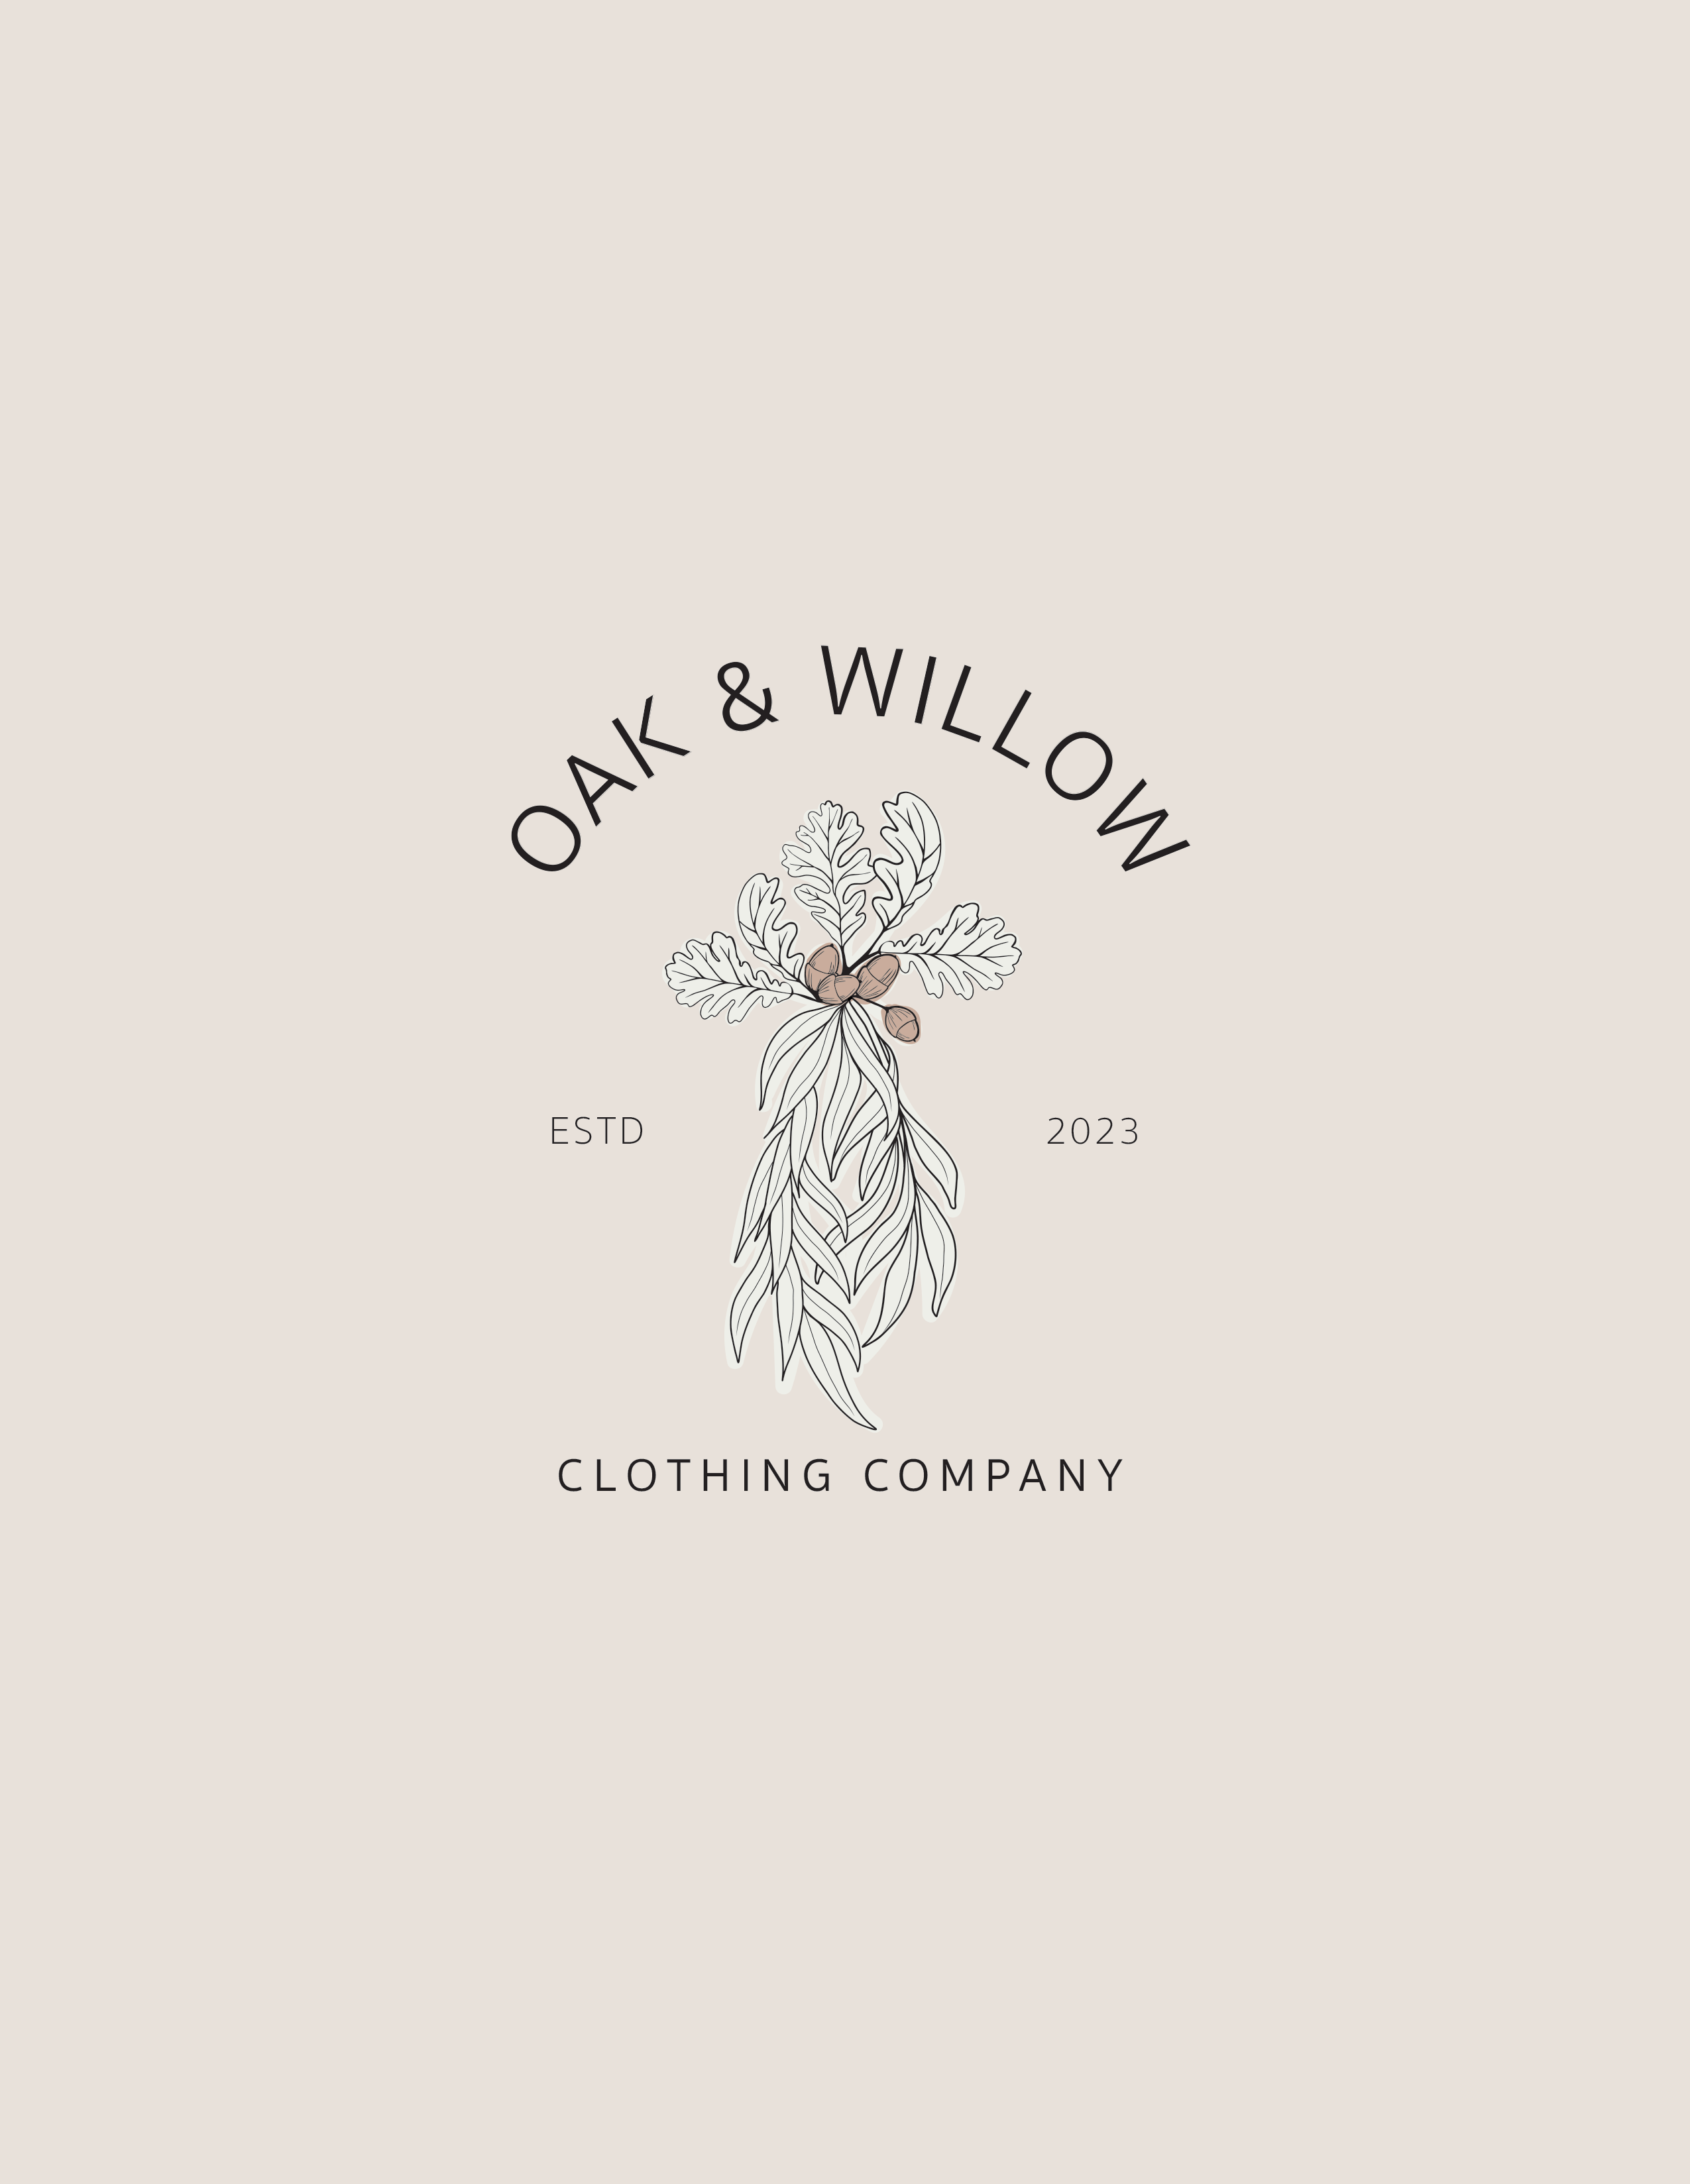 Oak & Willow Clothing Co.